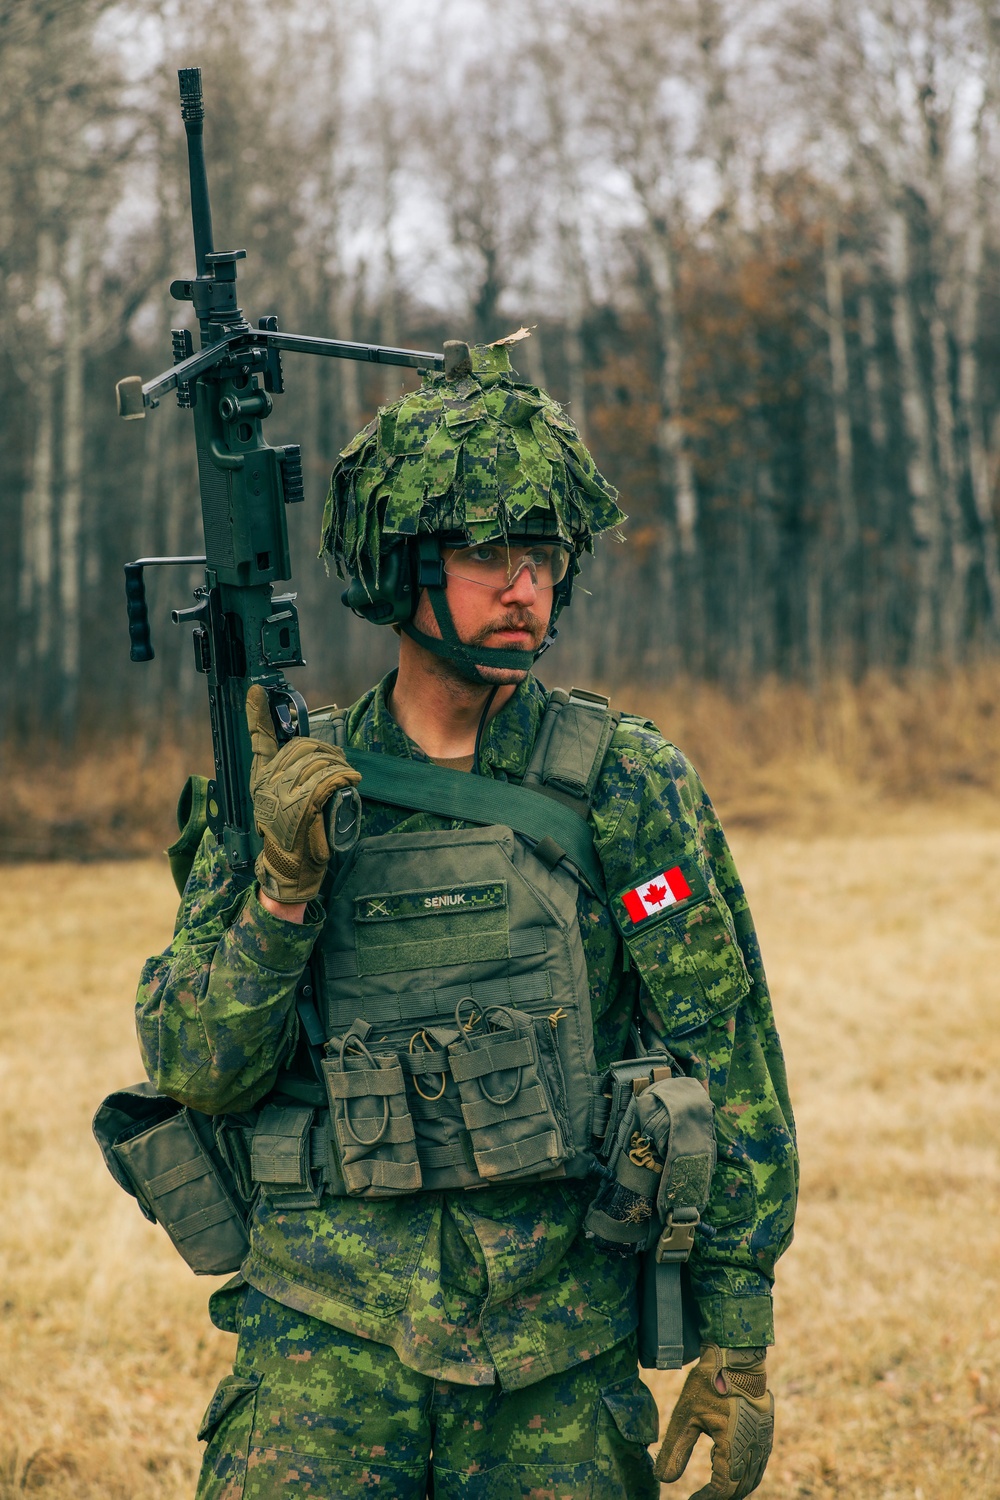 Canadian LSSR Conducts Live-Fire Events at Camp Ripley